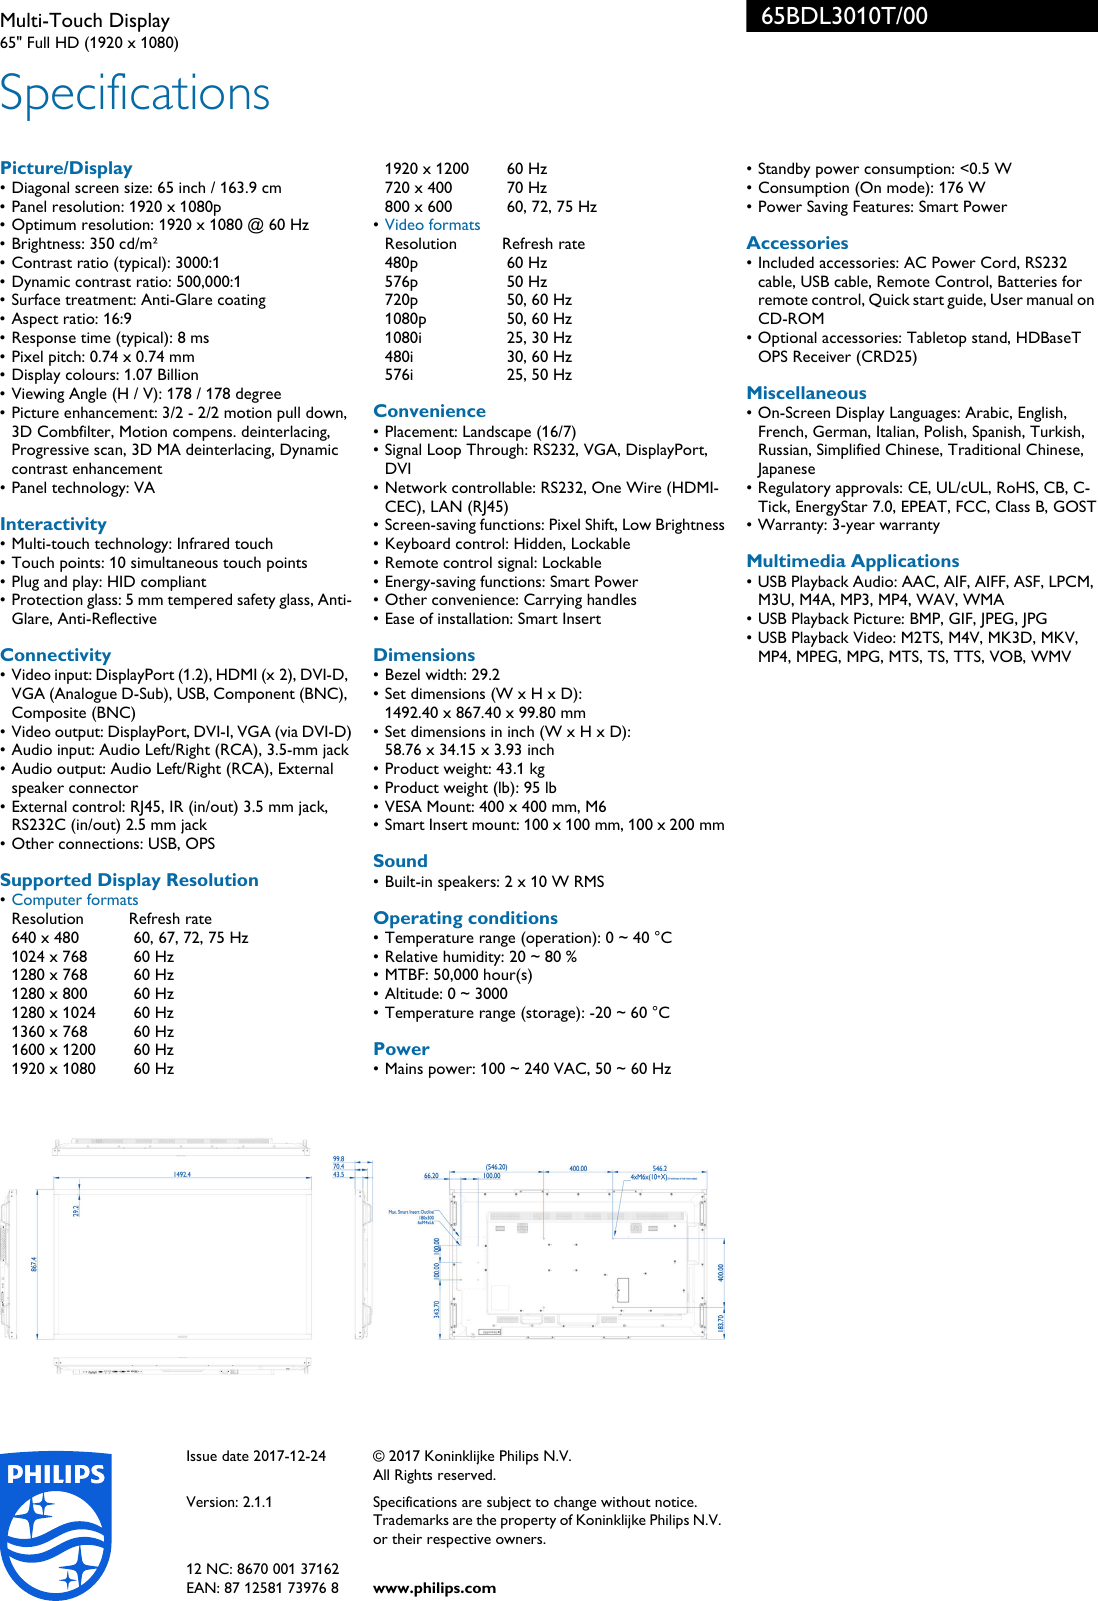 Page 3 of 3 - Philips 65BDL3010T/00 Multi-Touch Display User Manual Leaflet 65bdl3010t 00 Pss Enggb